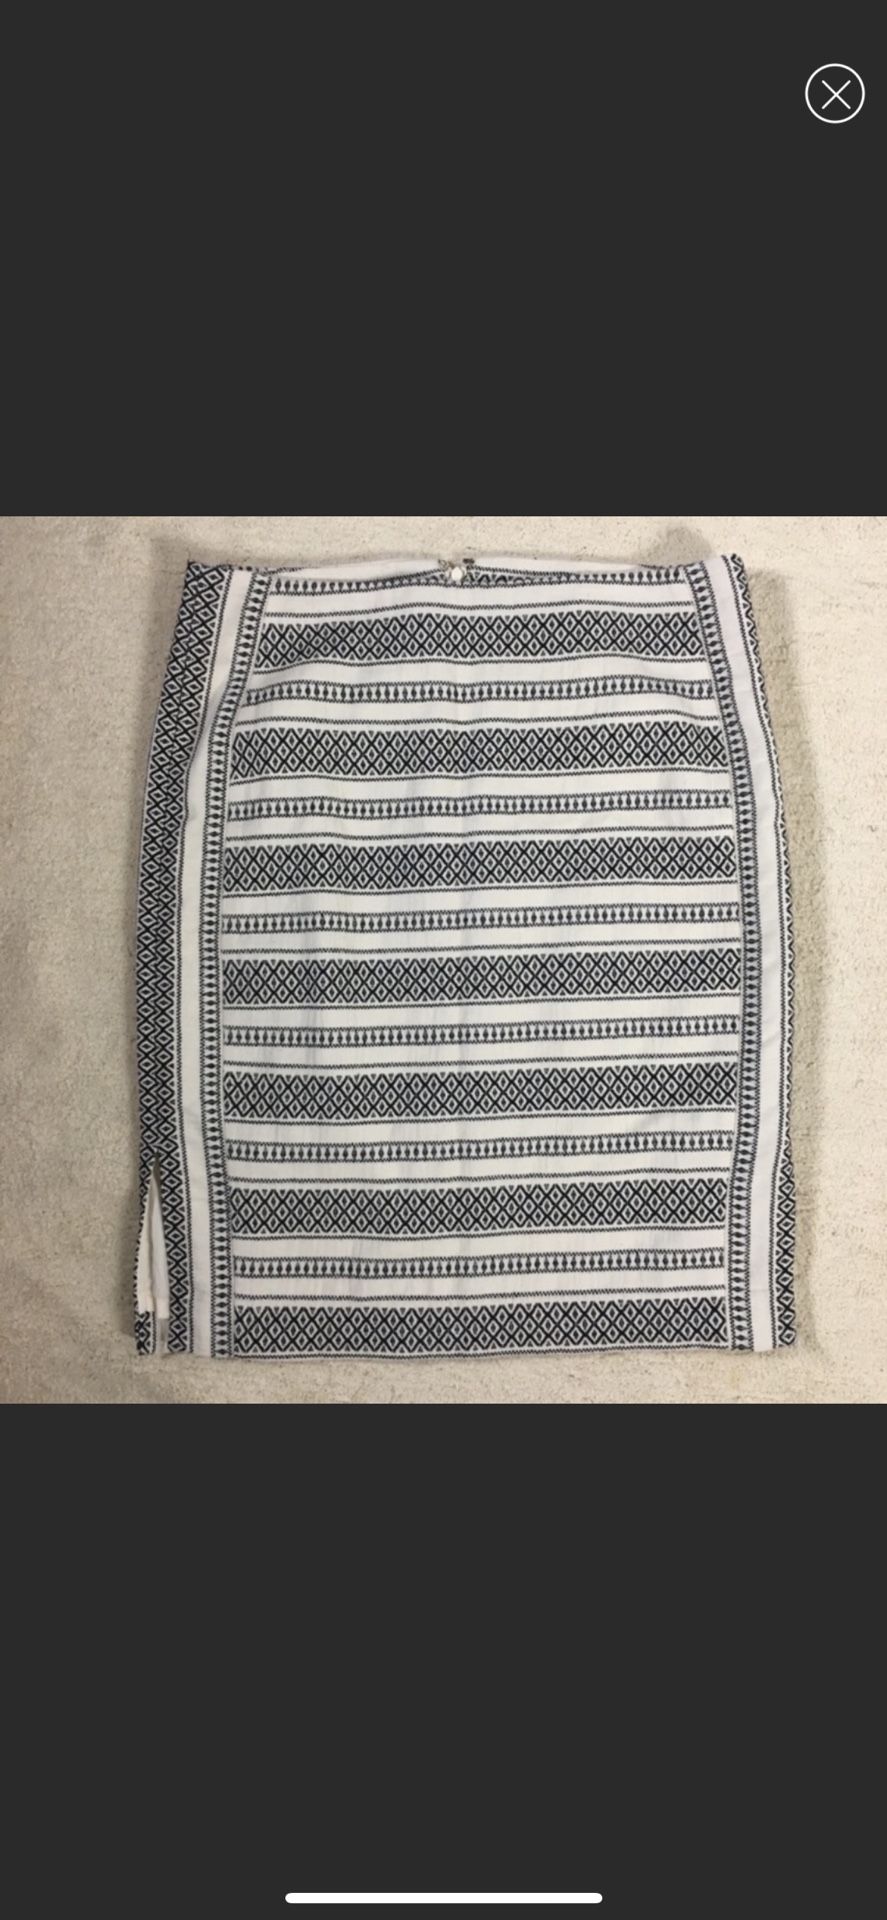 Ann Taylor LOFT Mosaic Stripe Pencil Skirt Size 16 Warm Ecru Lined Slits Lined.  Black and White  Back zipper Comes from a pet and smoke free househol